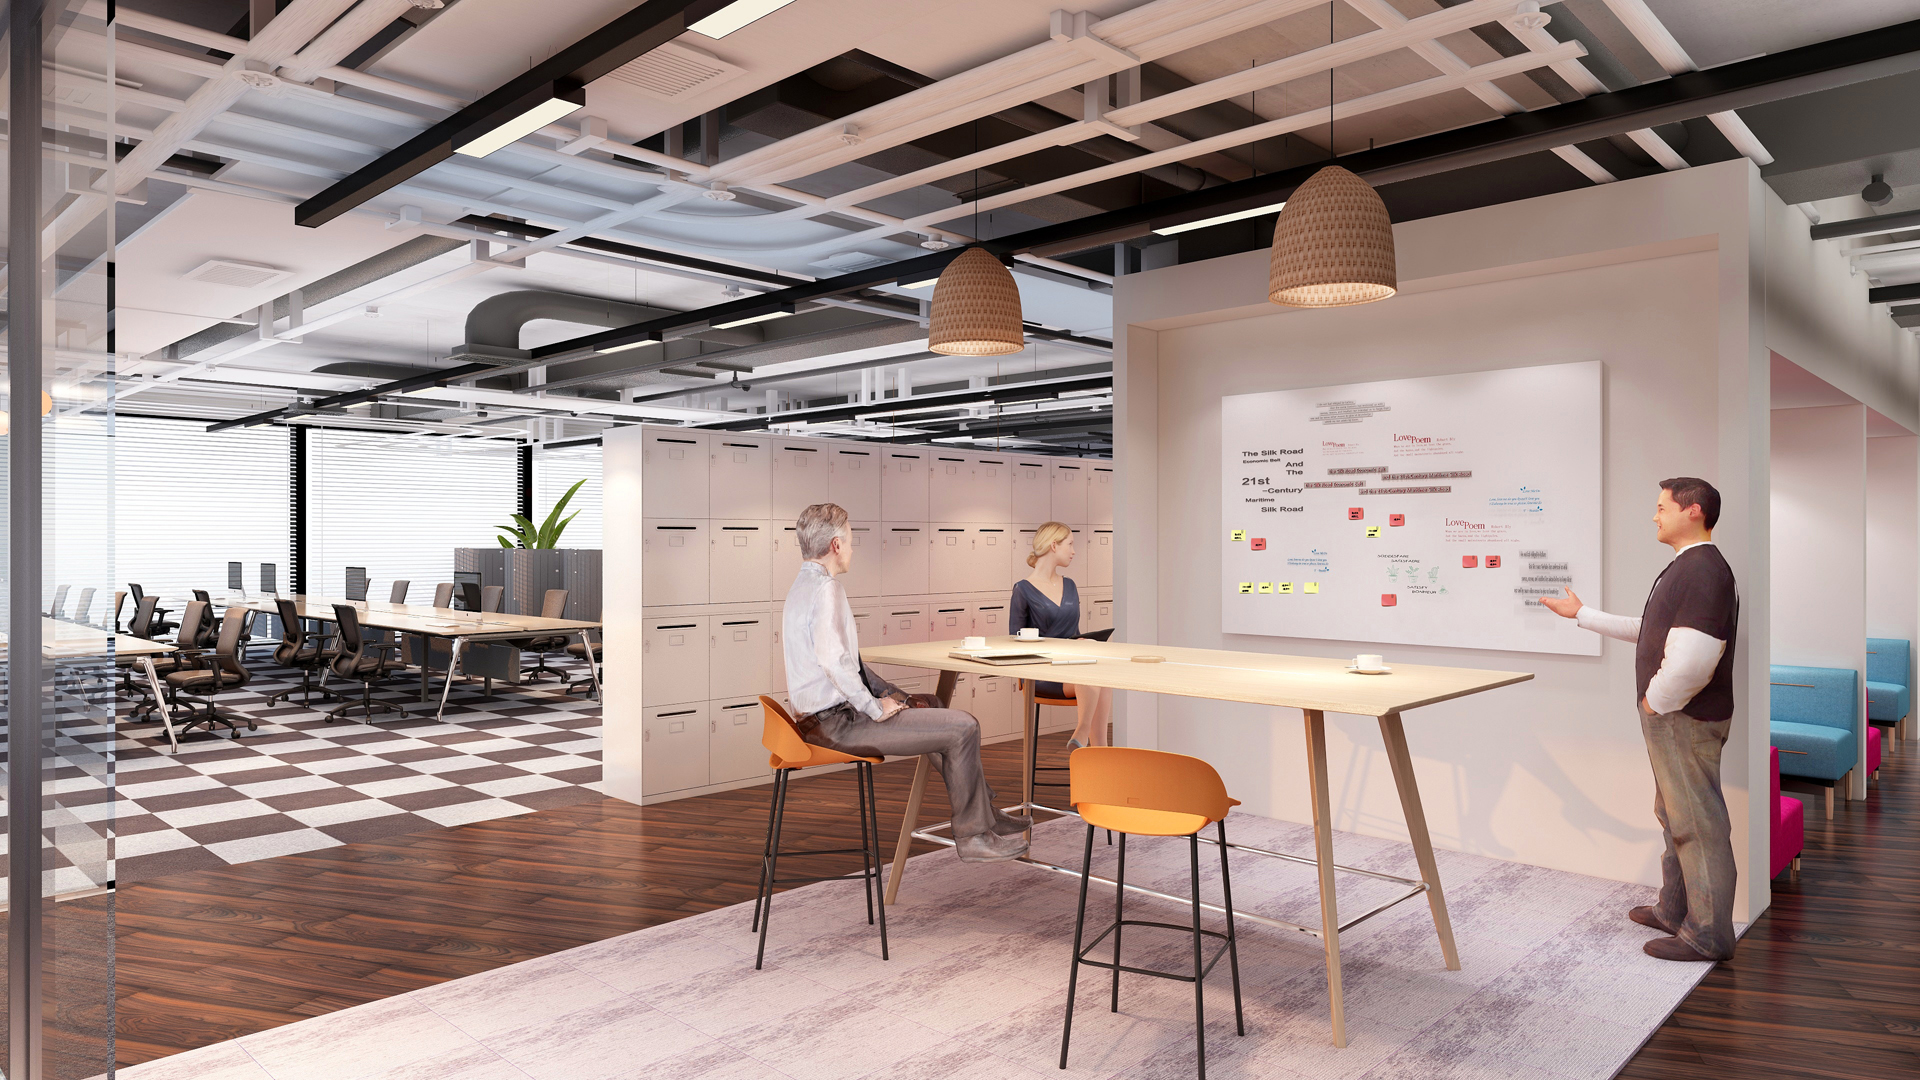 7 Ways Workspaces can Energize People and Support Well-being_2.jpg